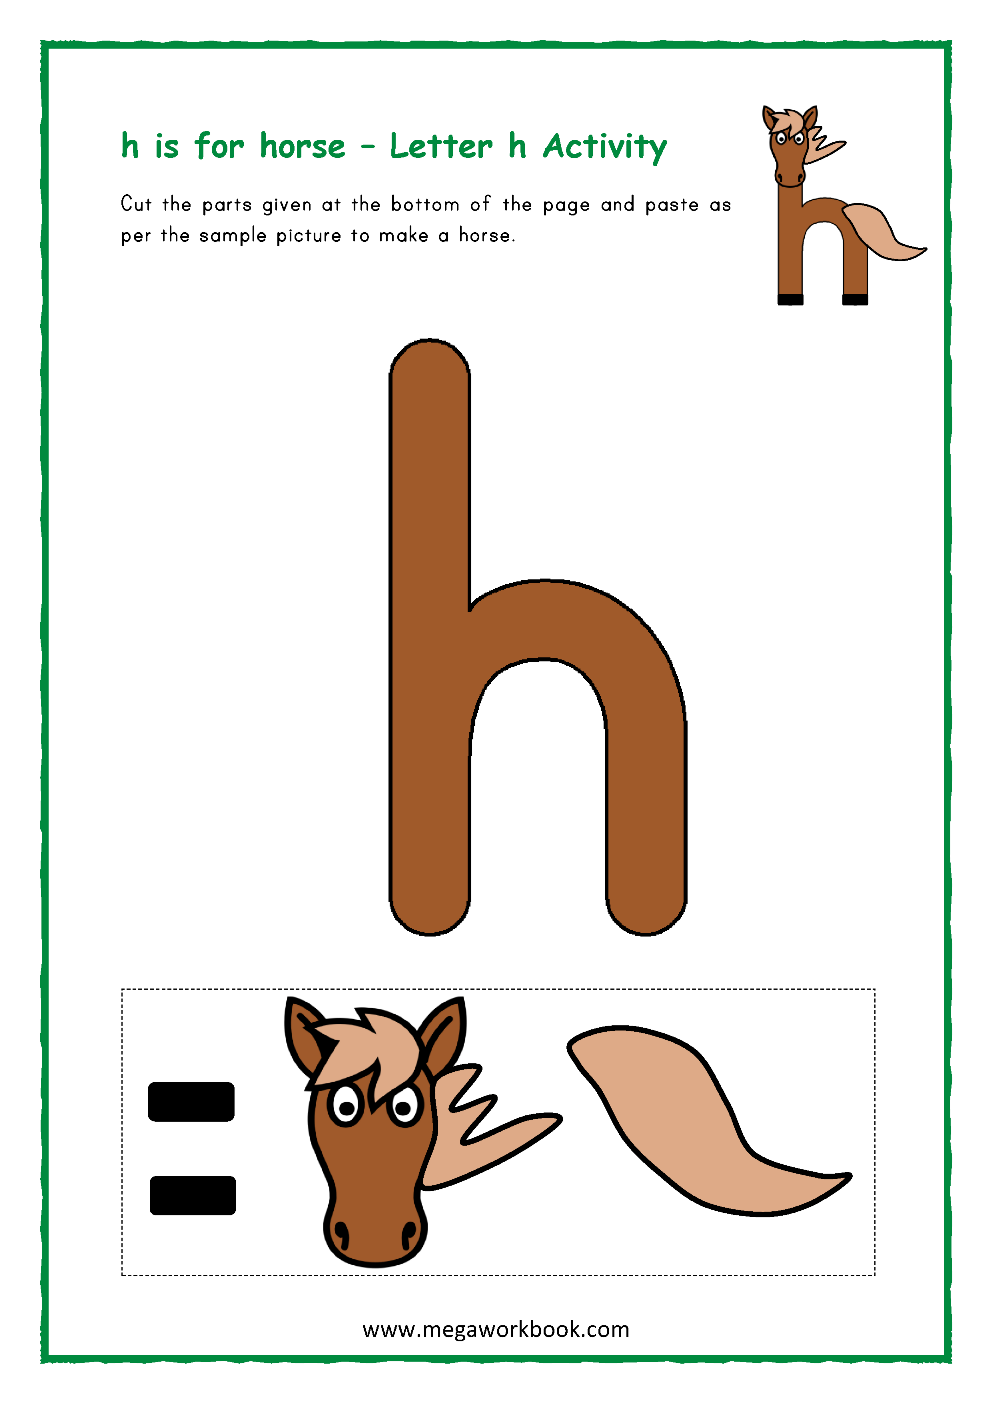 alphabet-letter-of-the-week-h-letter-h-activities-for-preschool-5-best-images-of-letter-h